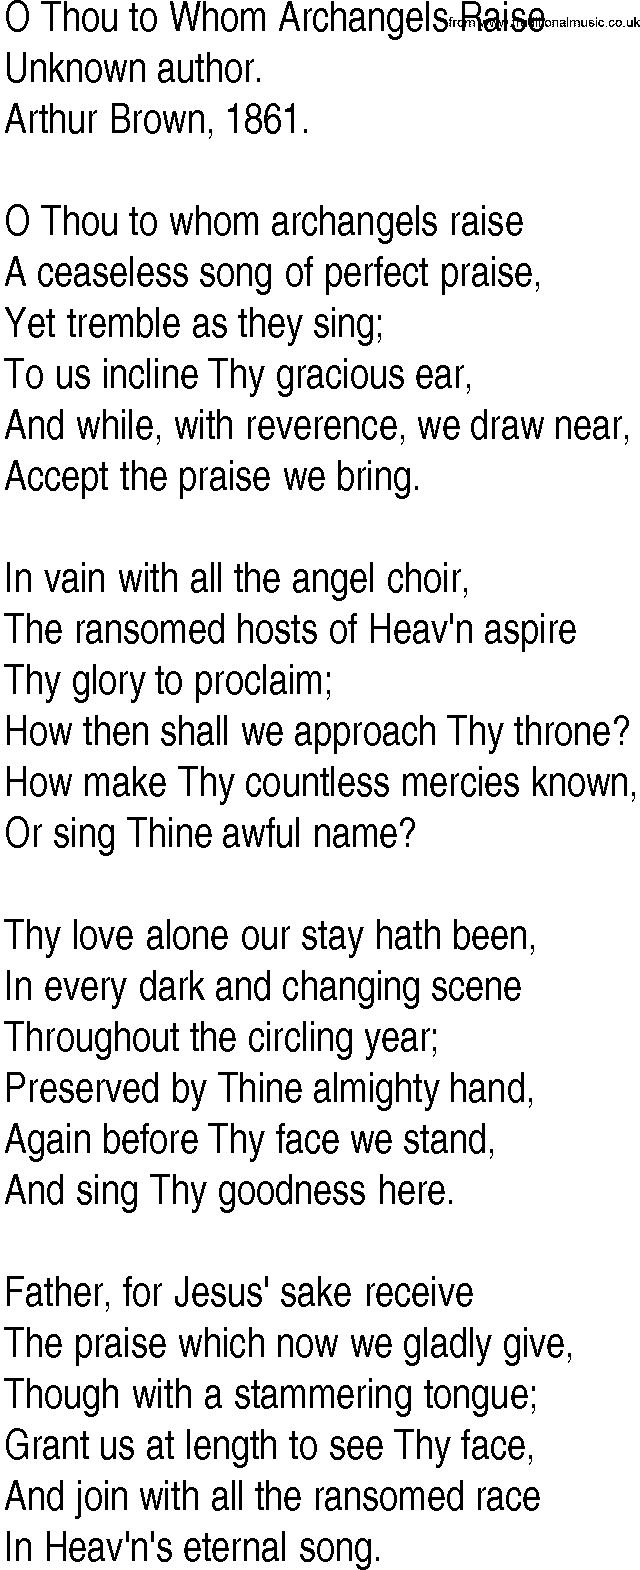 Hymn and Gospel Song: O Thou to Whom Archangels Raise by Unknown author lyrics